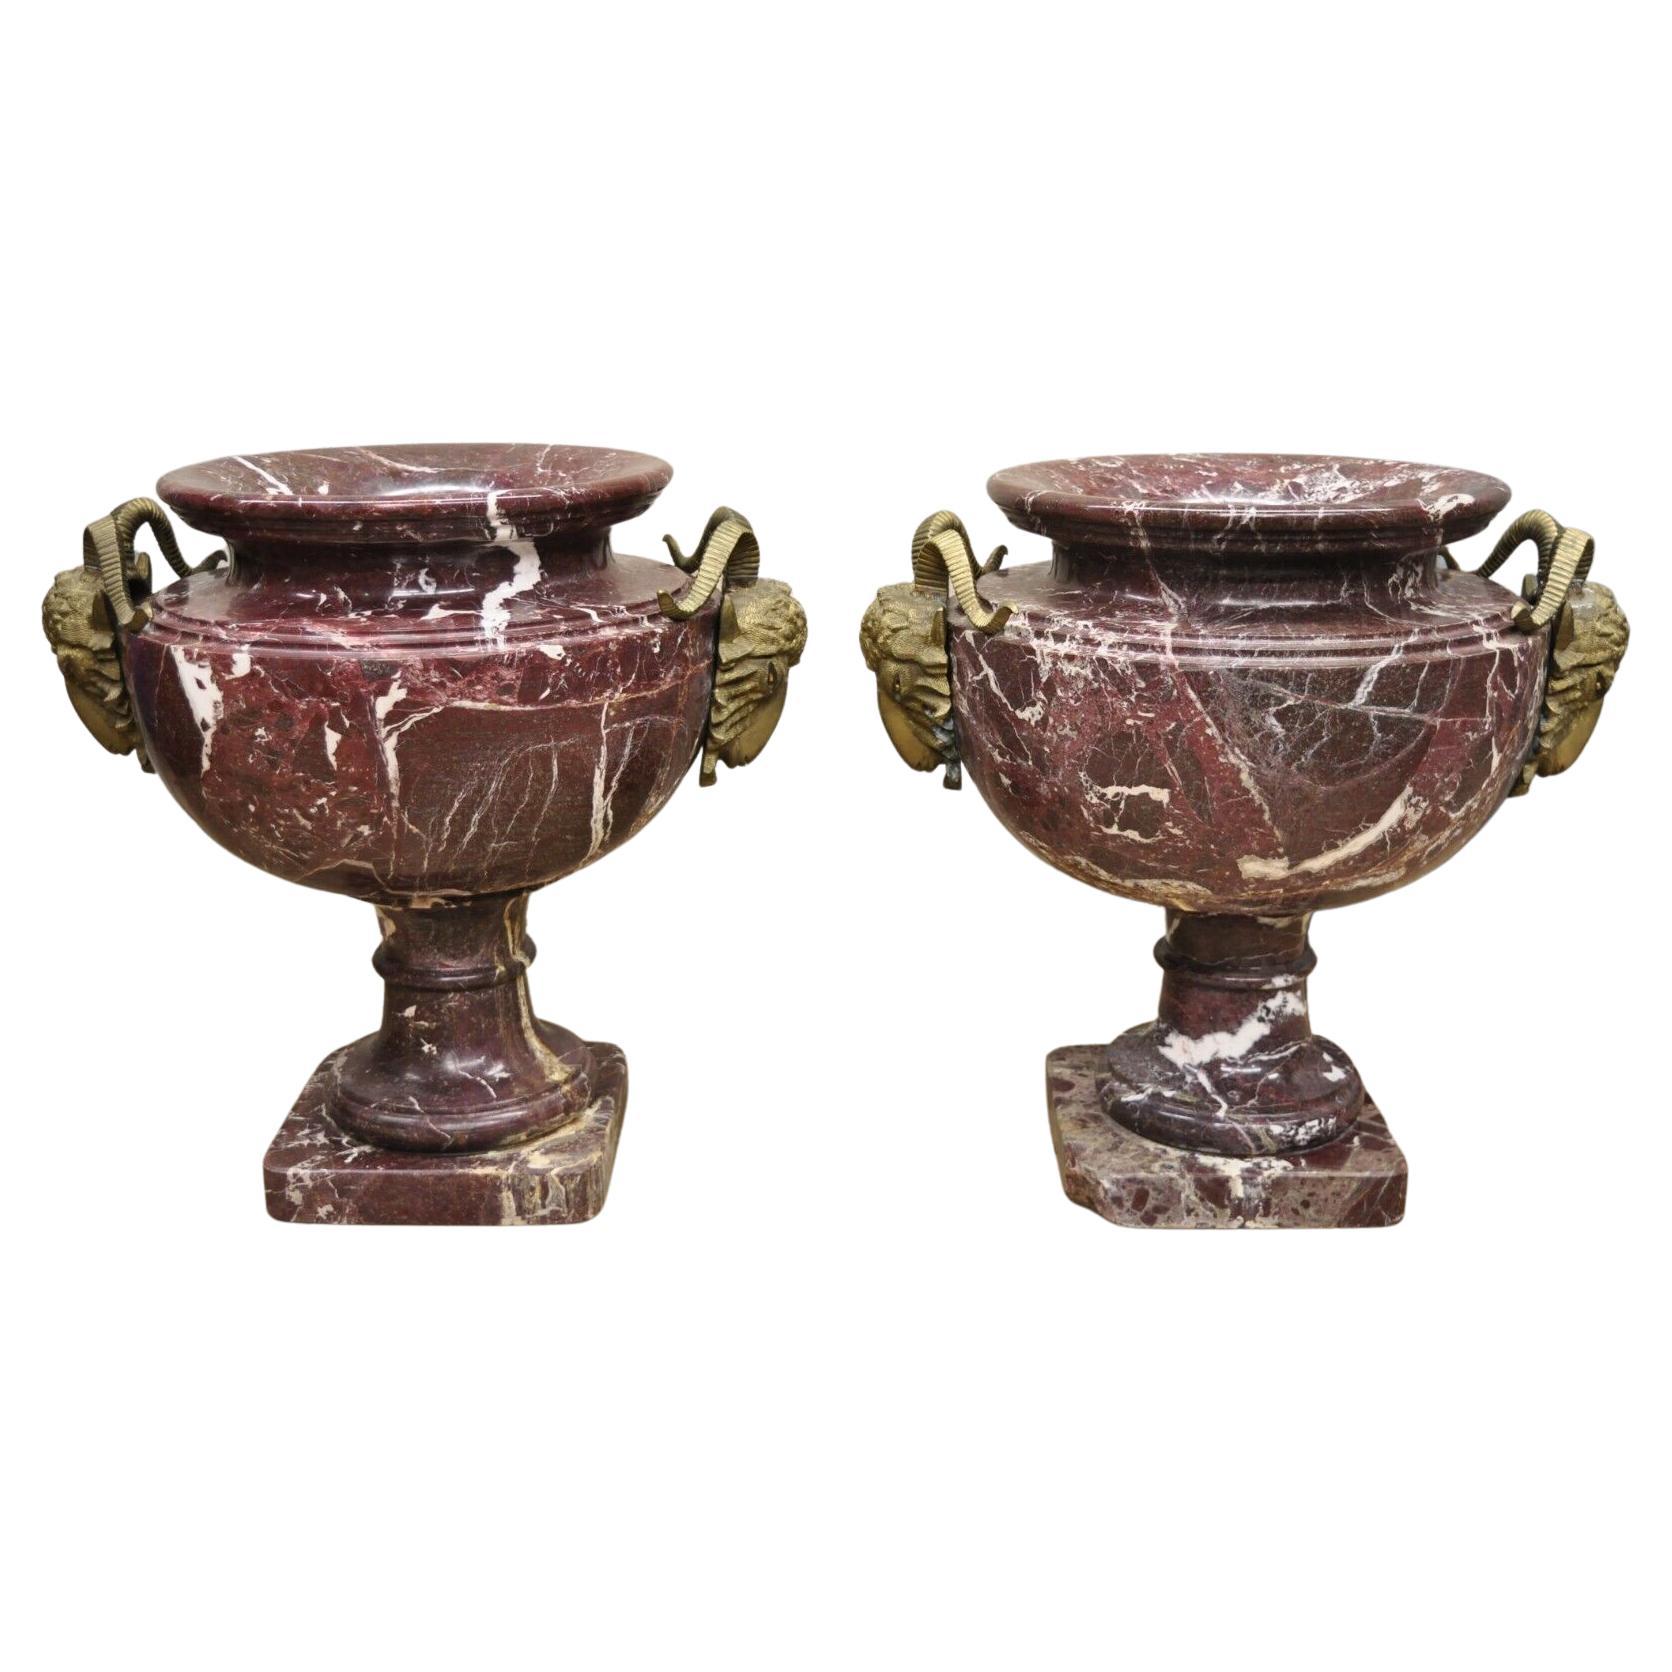 Large French Neoclassical Rouge Marble Bronze Rams Head Urn Planters - a Pair For Sale